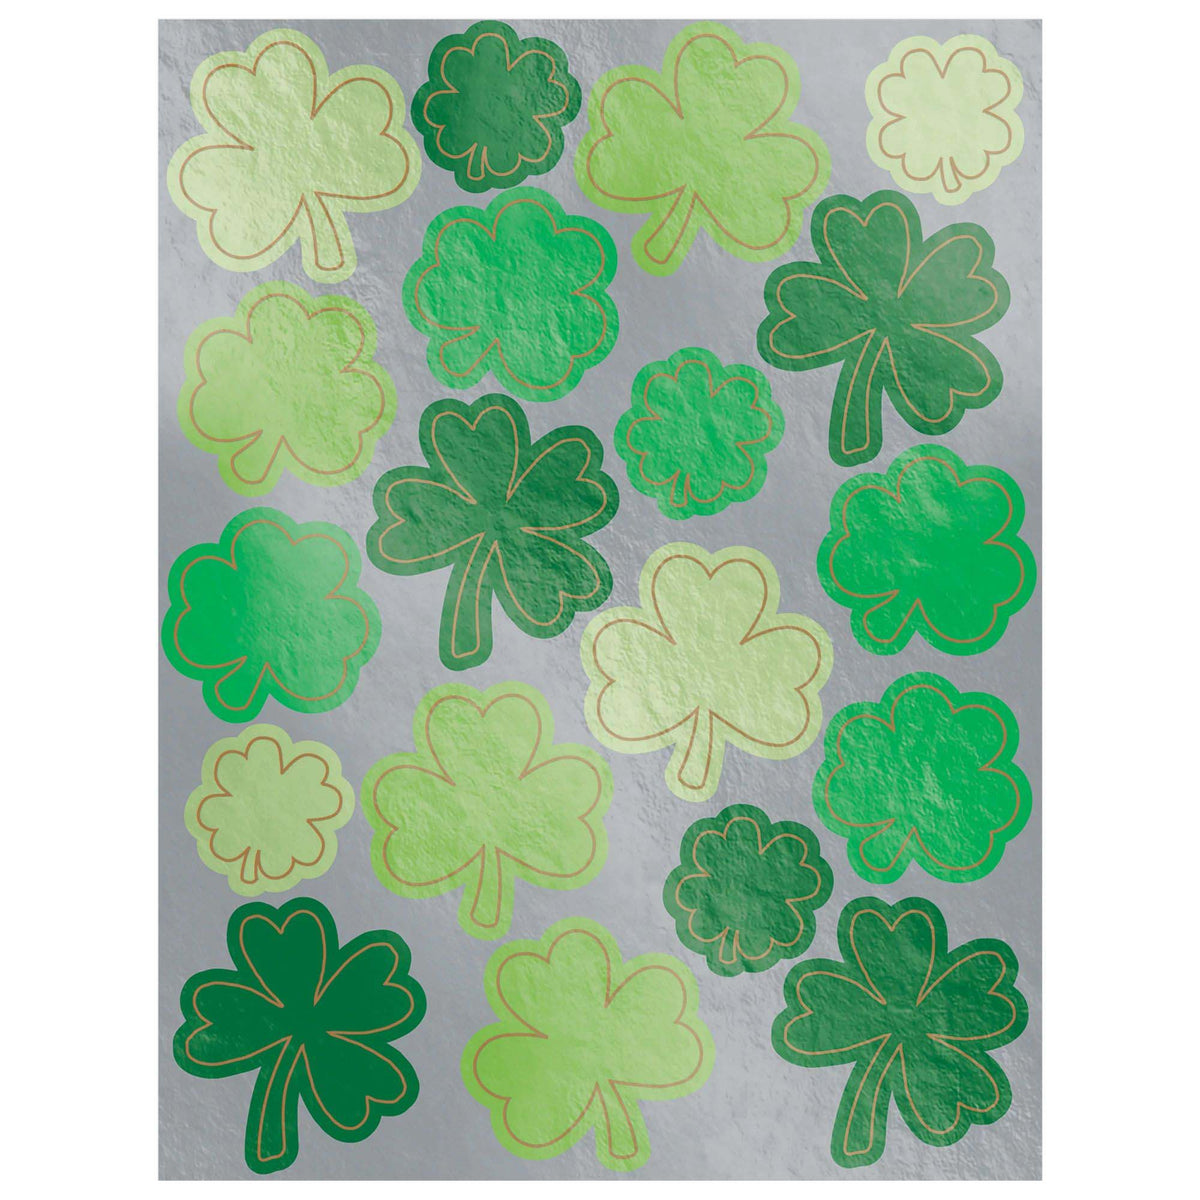 AMSCAN CA St-Patrick St-Patrick's Day Metallic Stickers, 3 Count